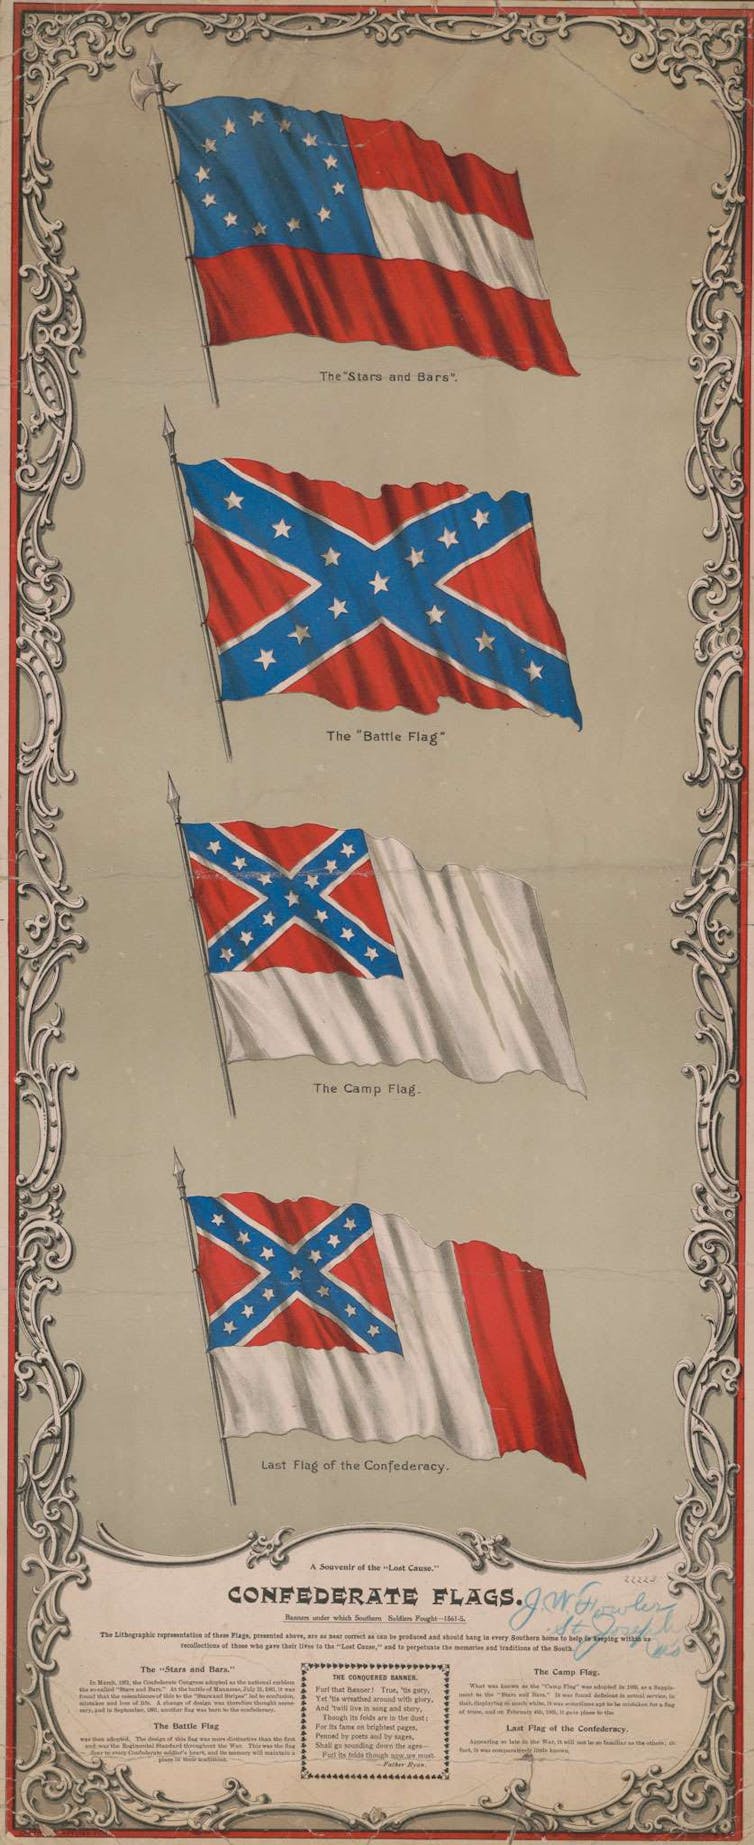 Four flags of the Confederacy